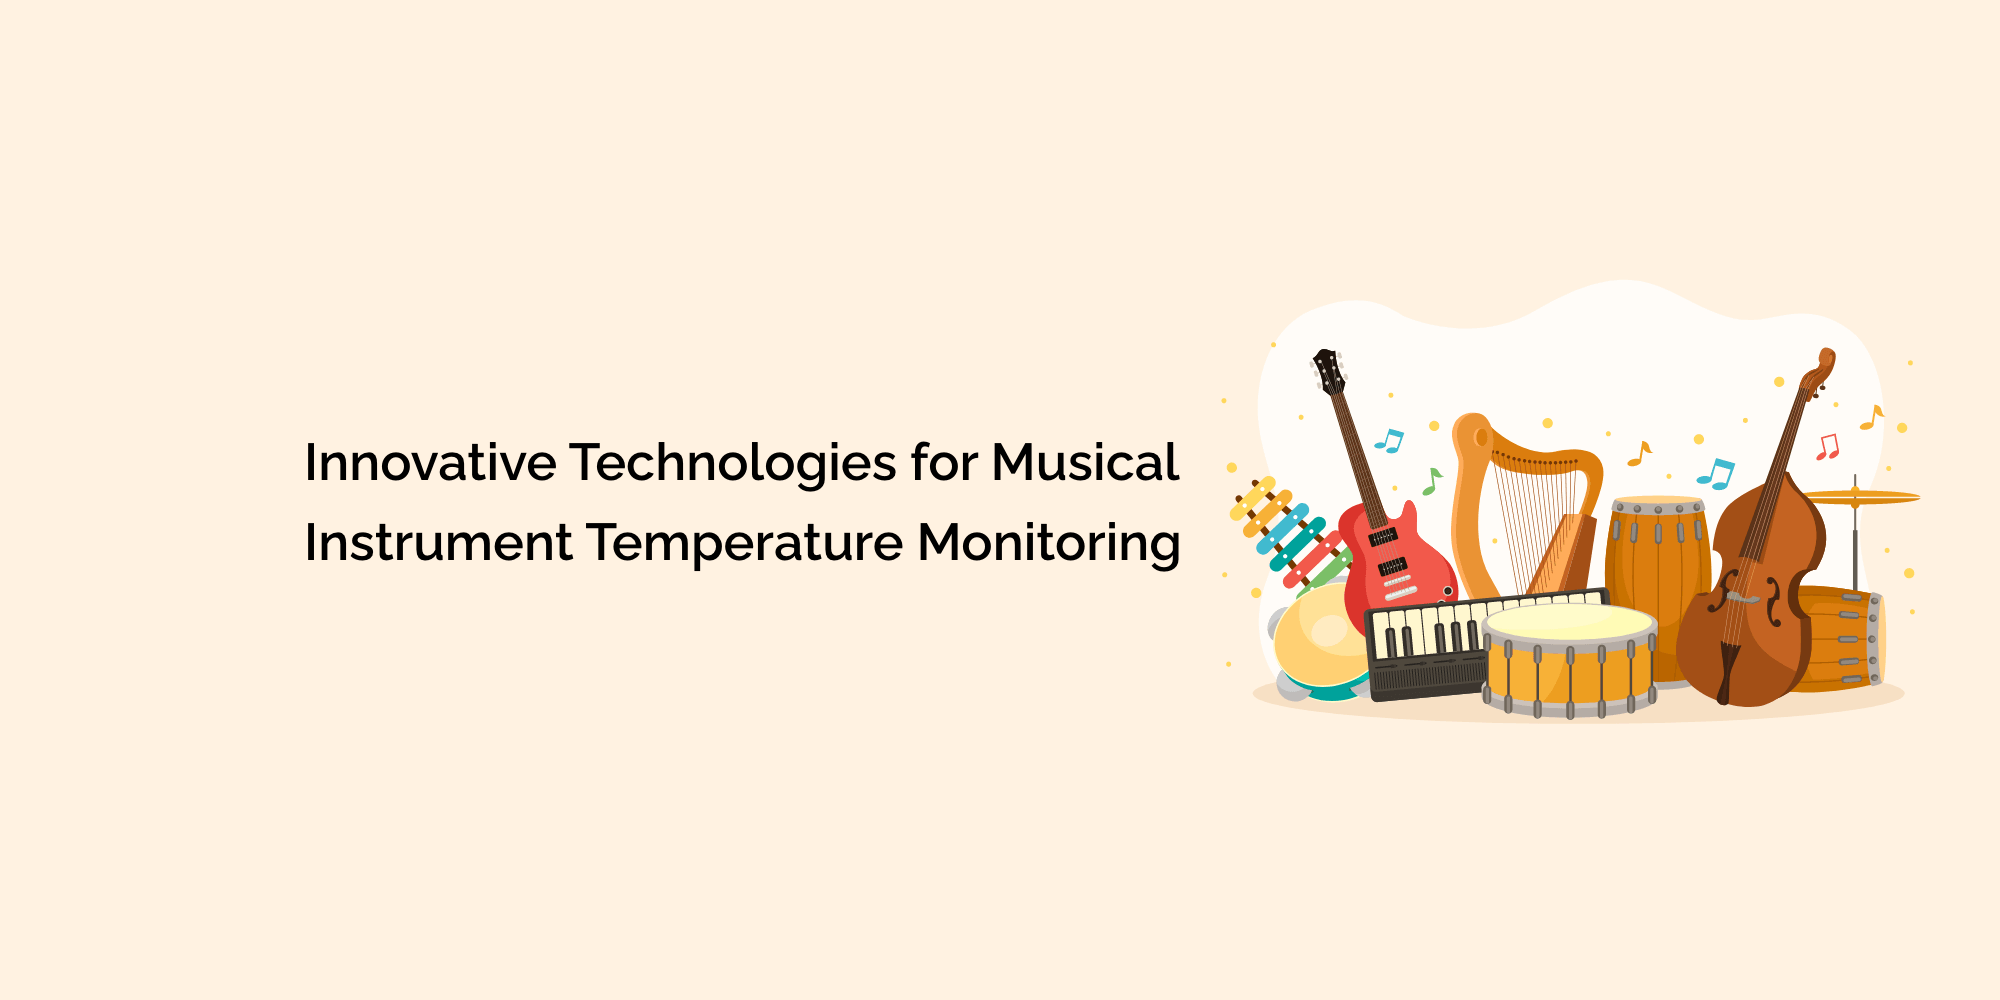 Innovative Technologies for Musical Instrument Temperature Monitoring